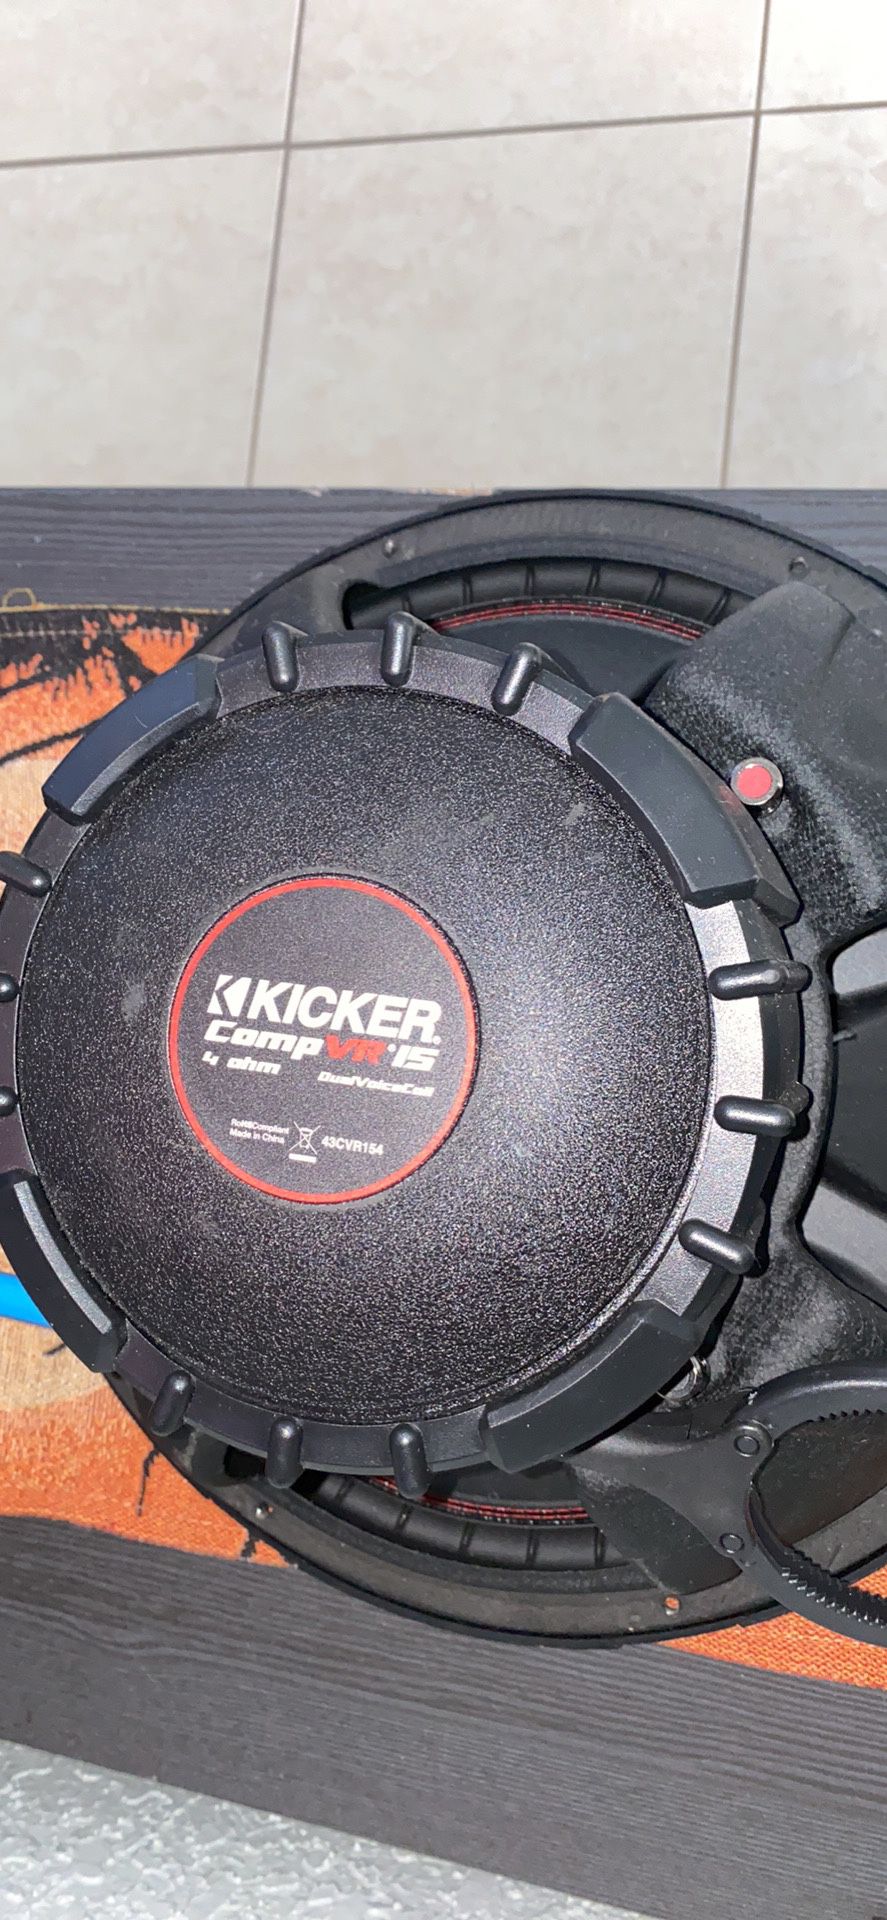 Kicker competition 15inch subwoofers